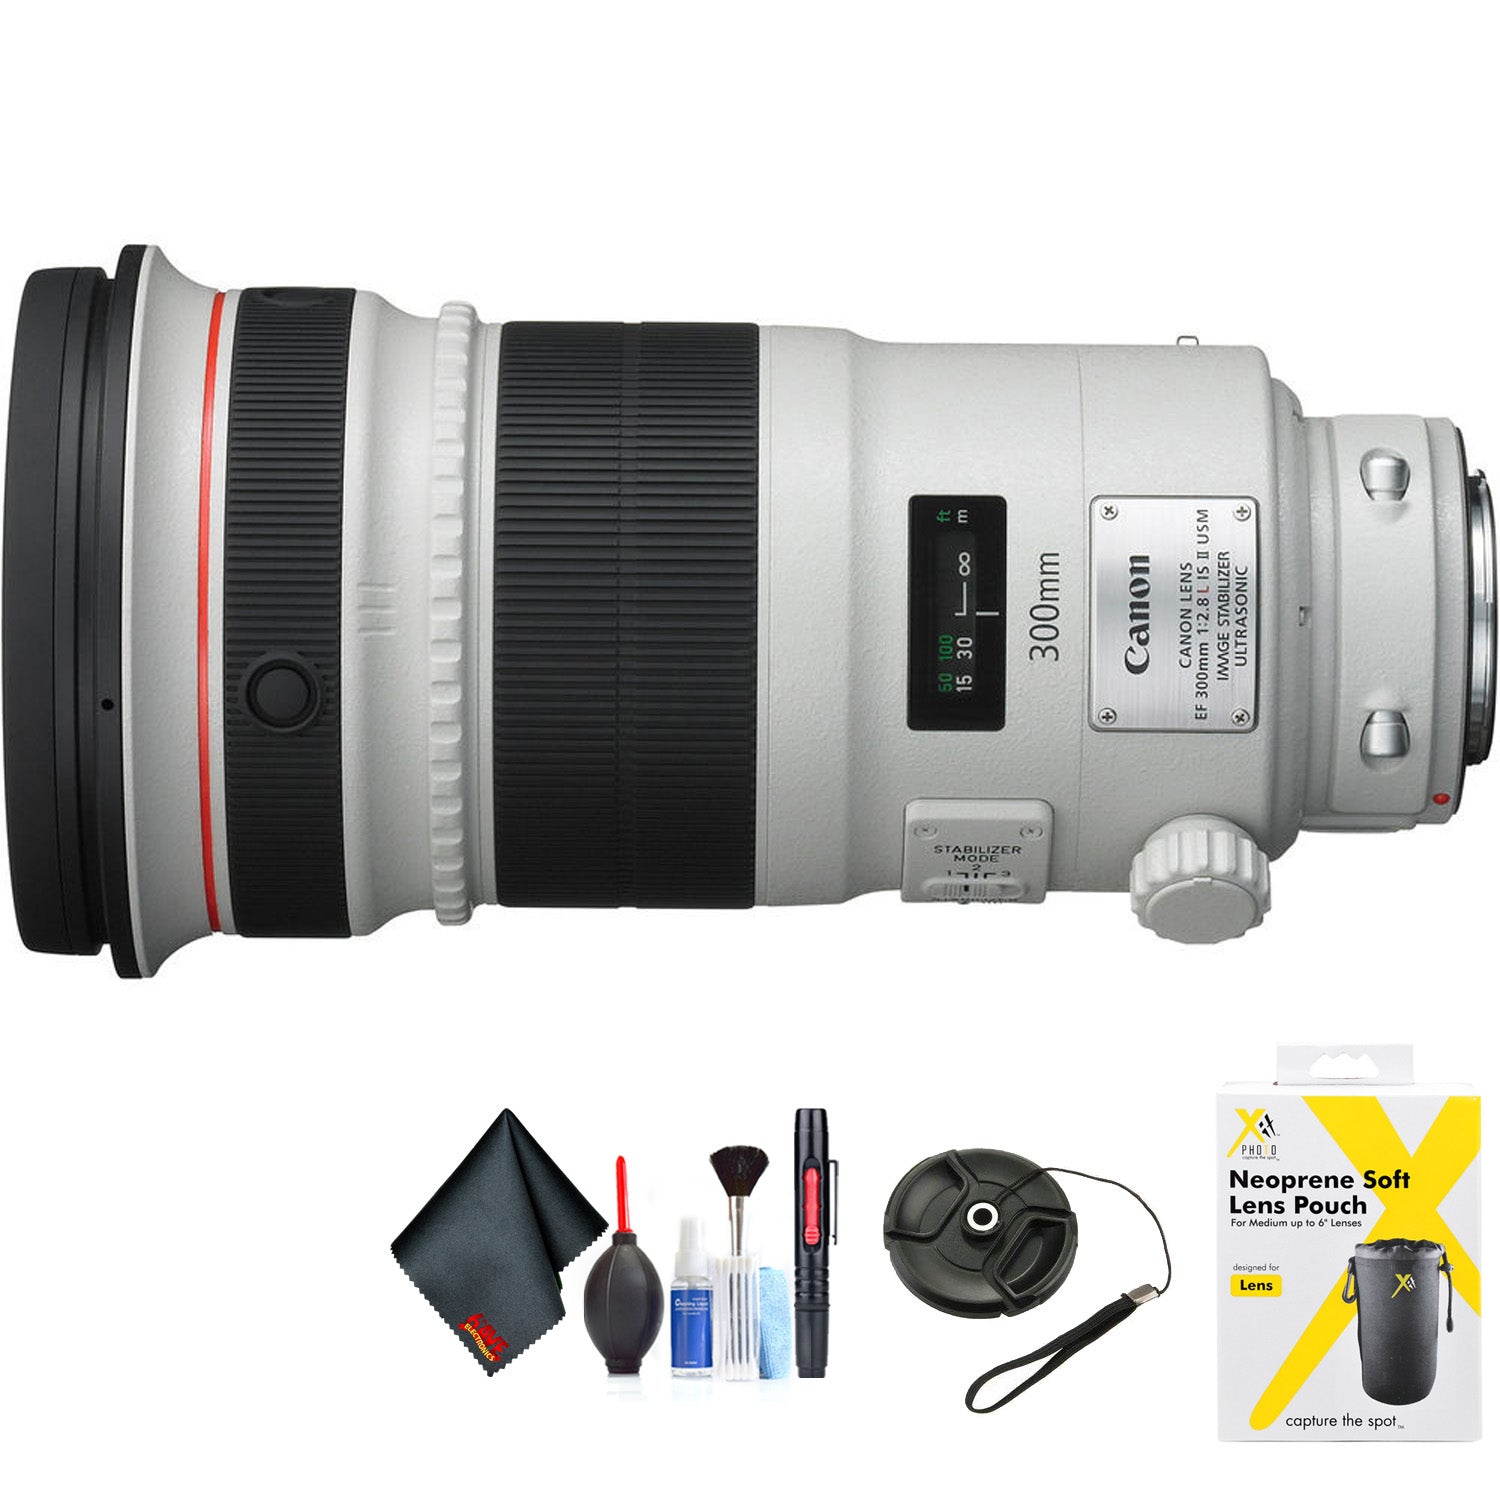 Canon EF 300mm f/2.8L is II USM Lens for Canon EF Mount + Accessories (International Model with 2 Year Warranty)